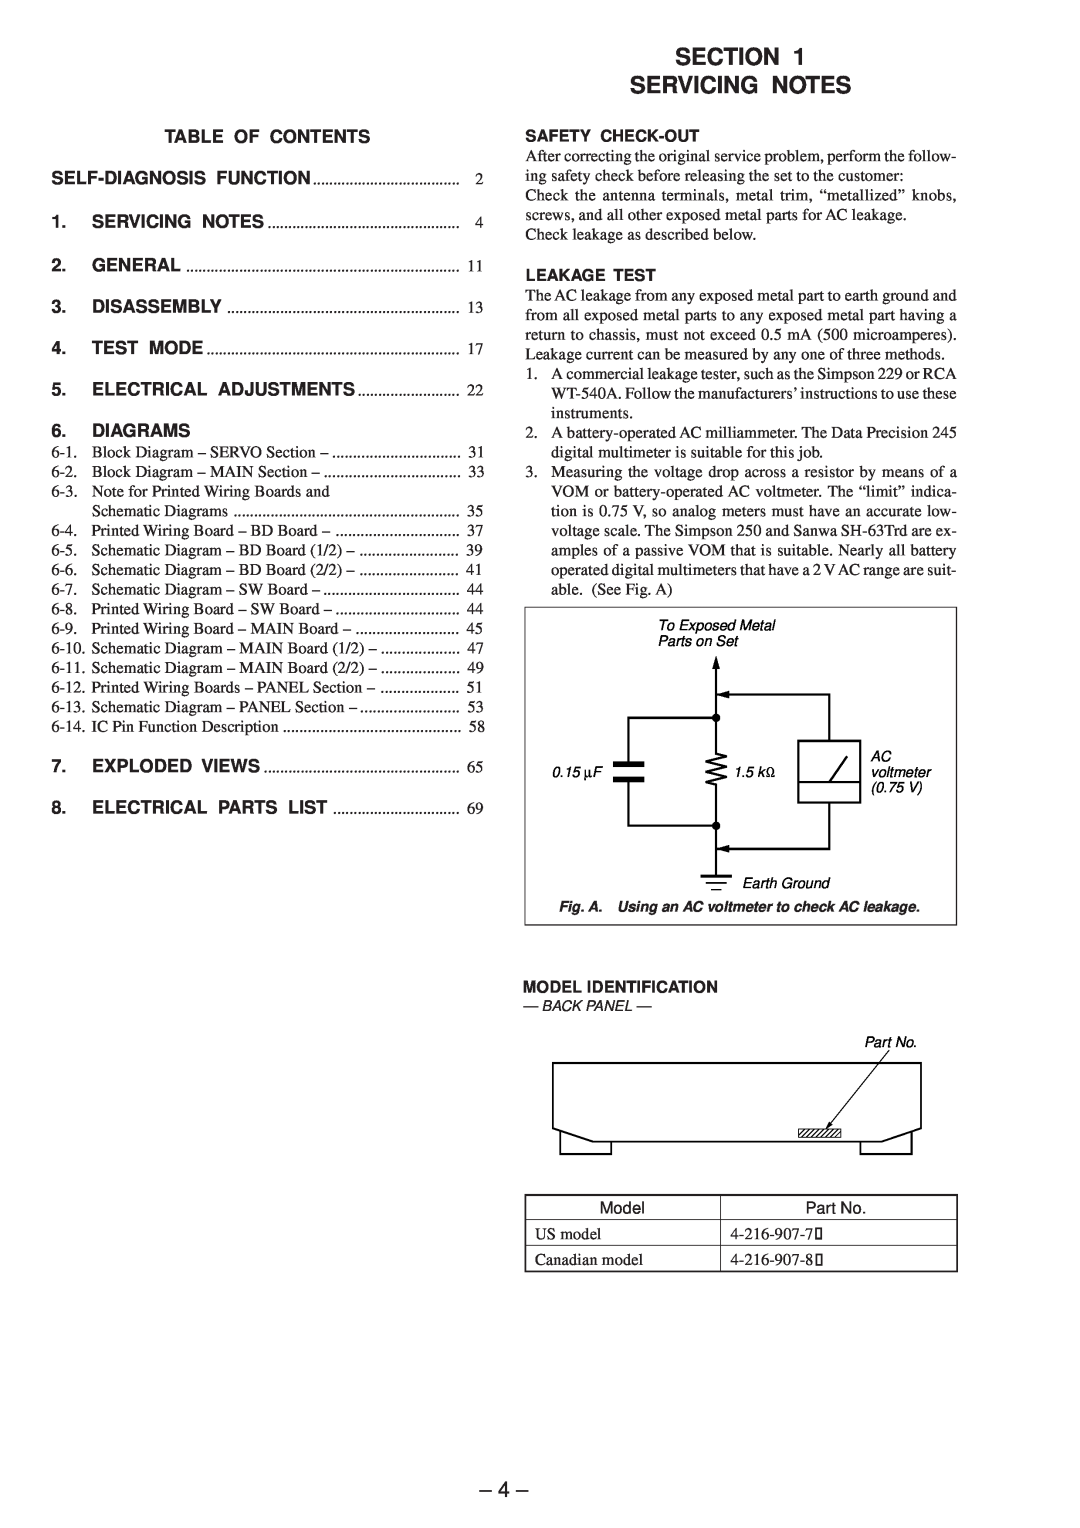 Sony MDS-JE630 Section Servicing Notes, Table Of Contents, Diagrams, Self-Diagnosisfunction, General, Disassembly 